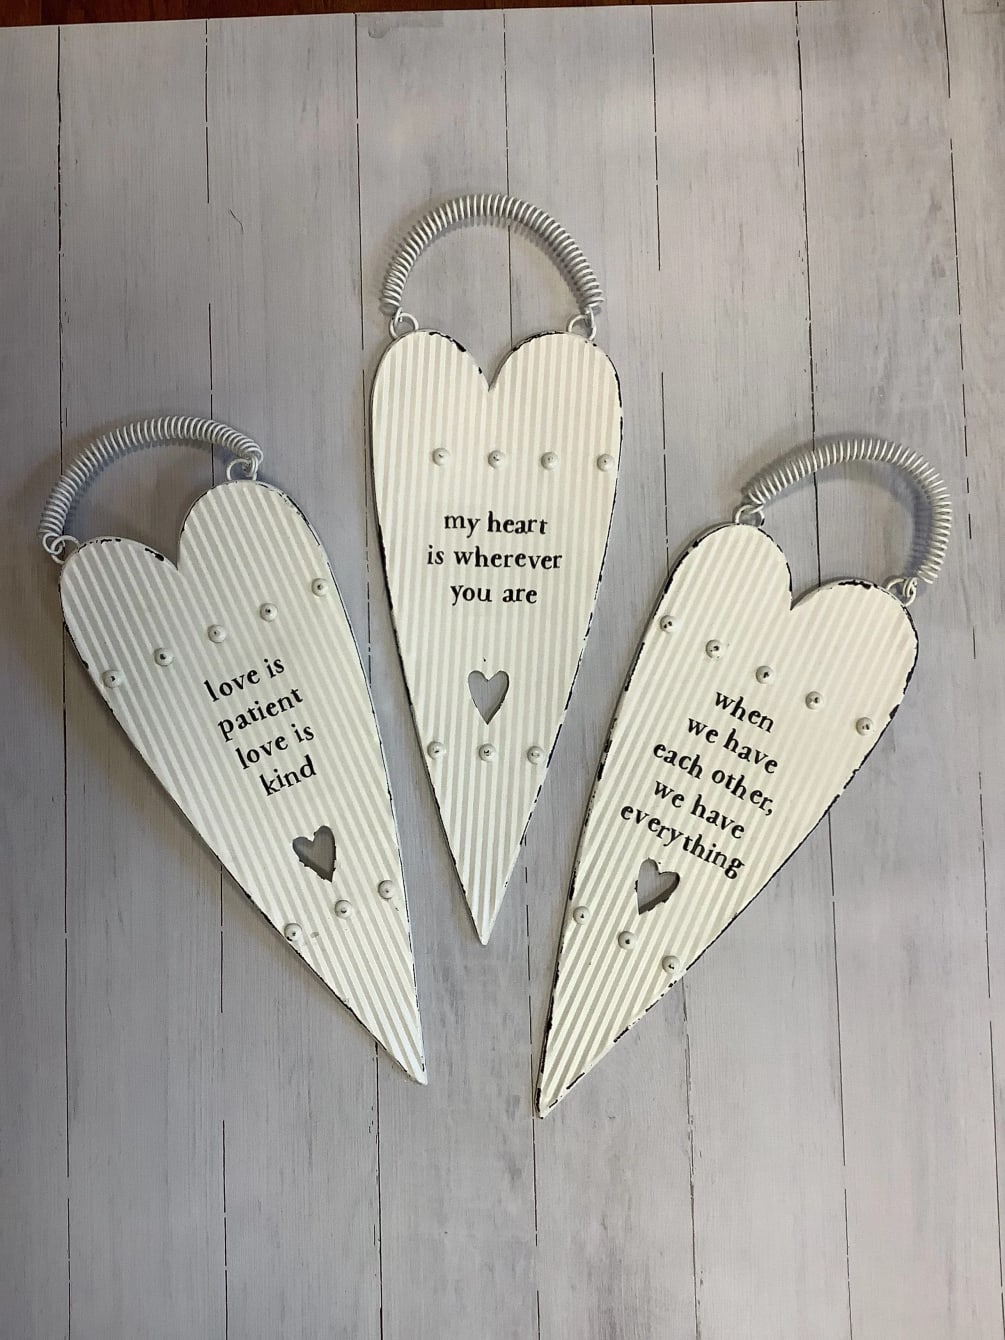 These adorable metal love signs to hang can be wrapped side by